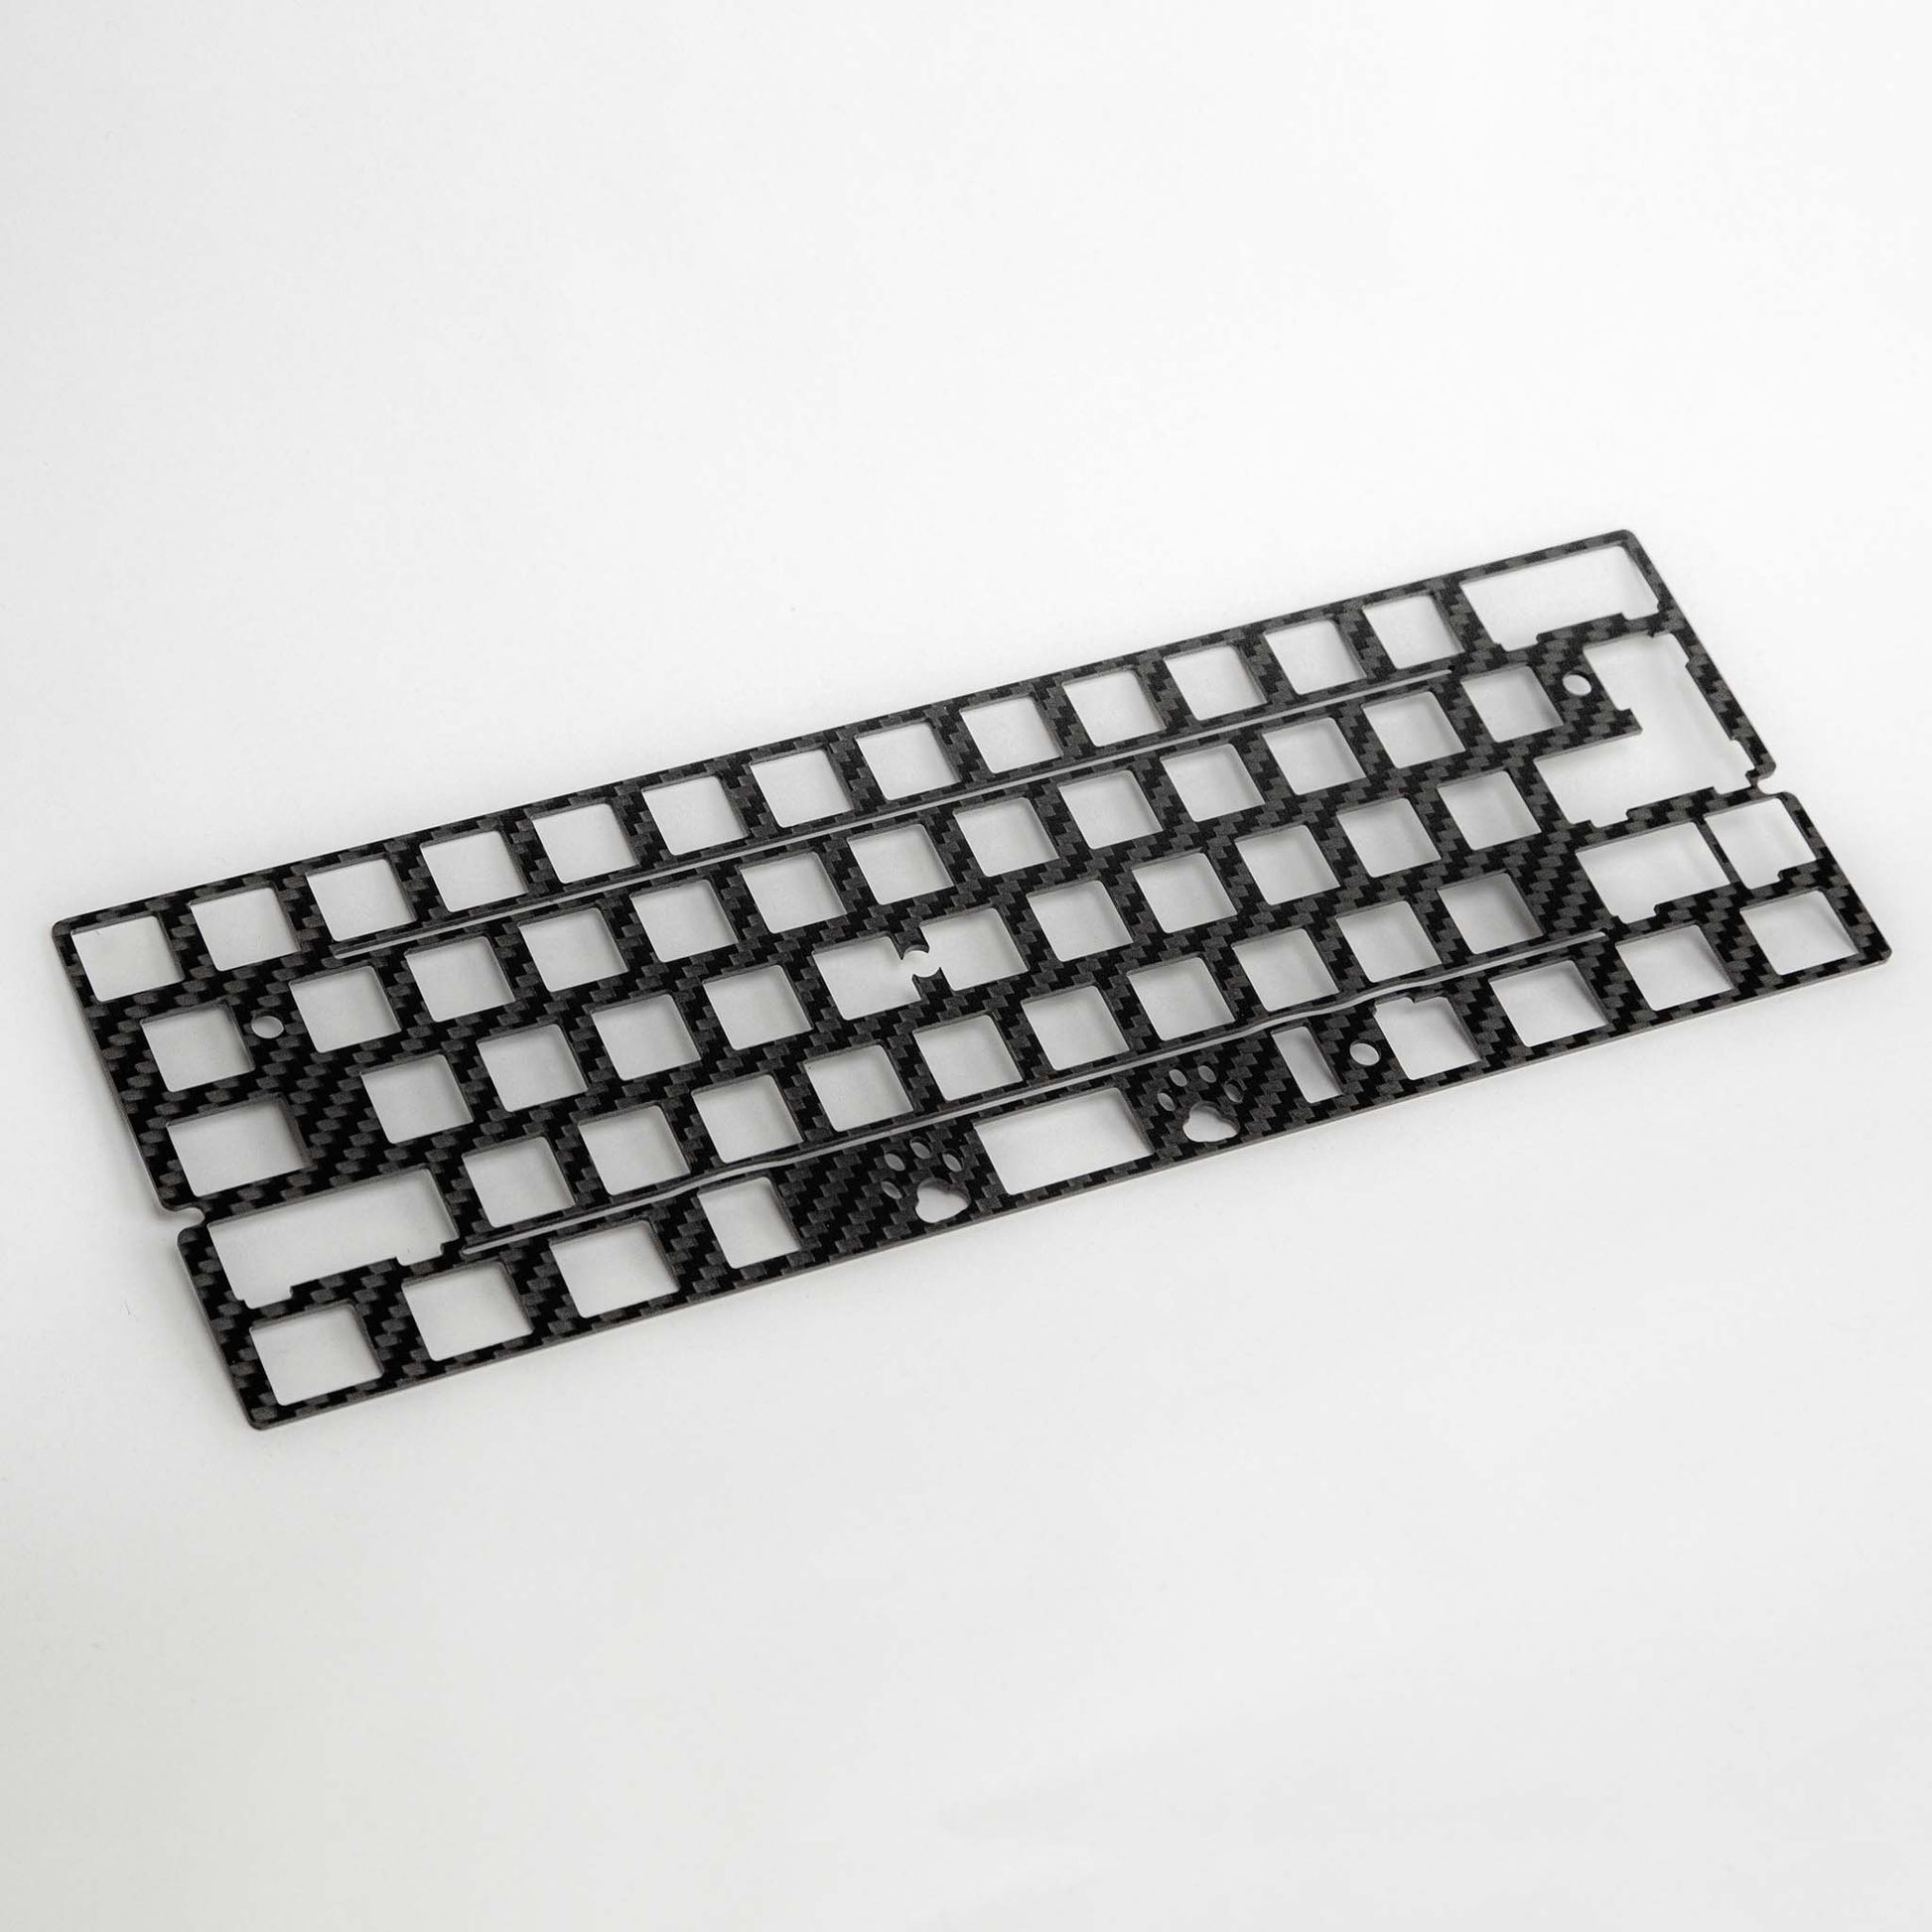 KeebCats UK Denis Plate - Premium Tray Mount 60% Keyboard Plate Woven Carbon Fibre